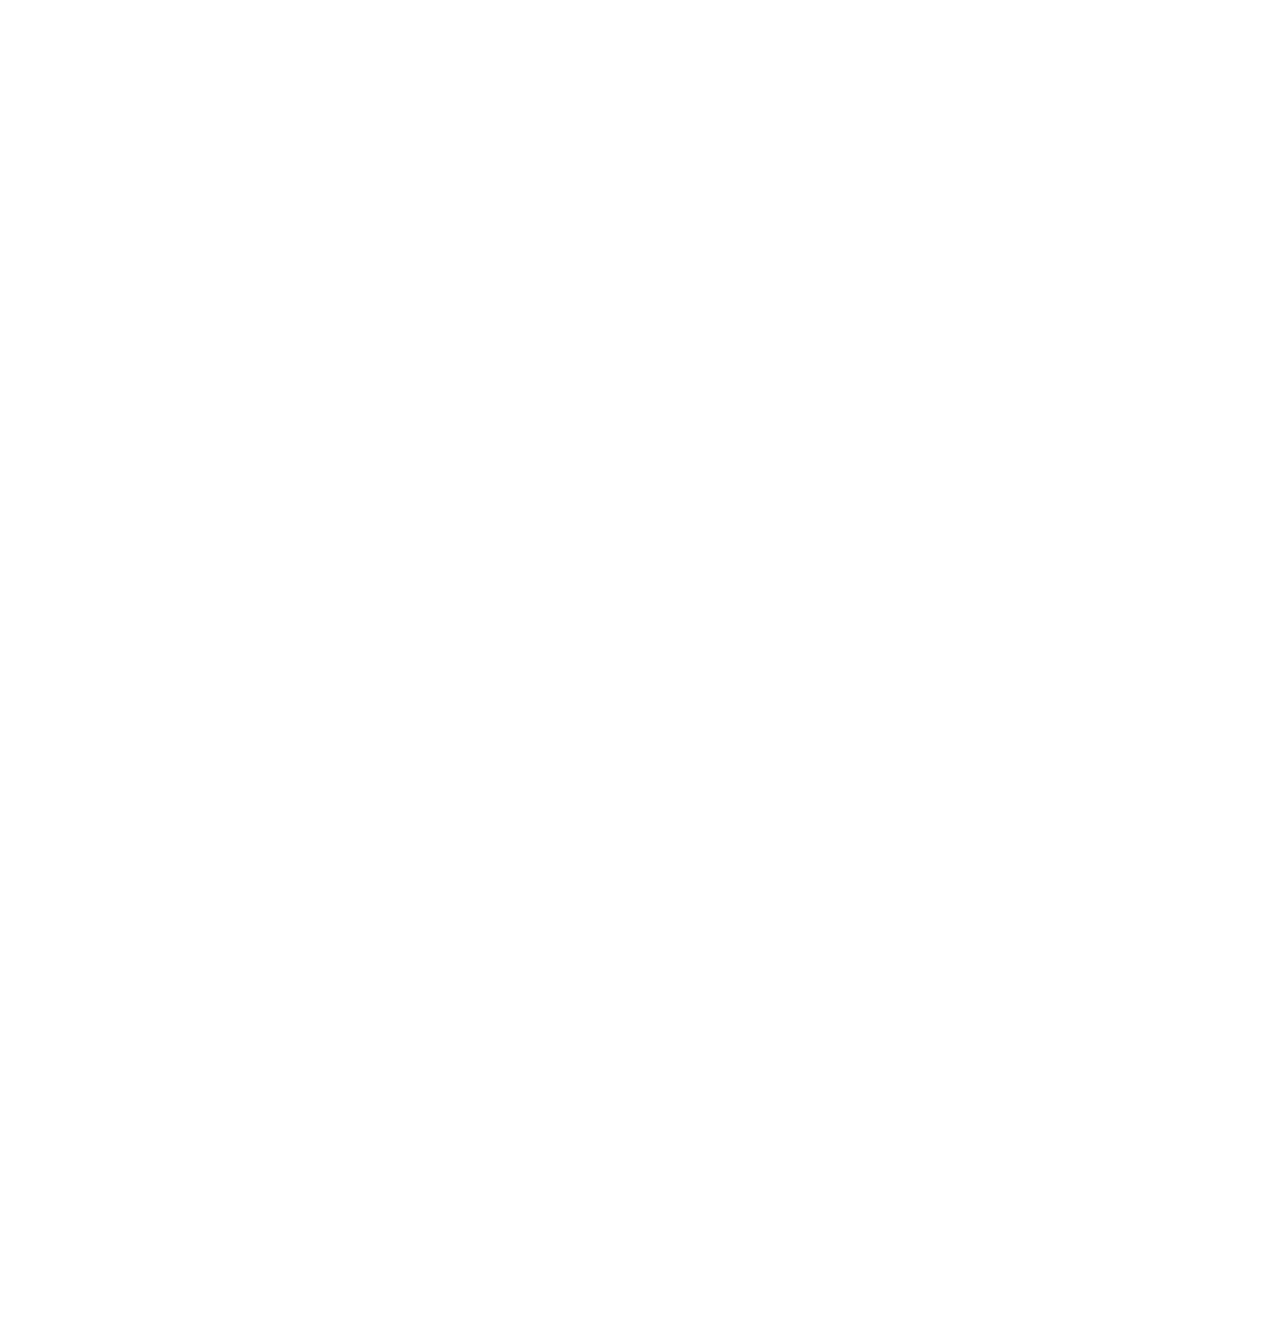 Freedom to Move